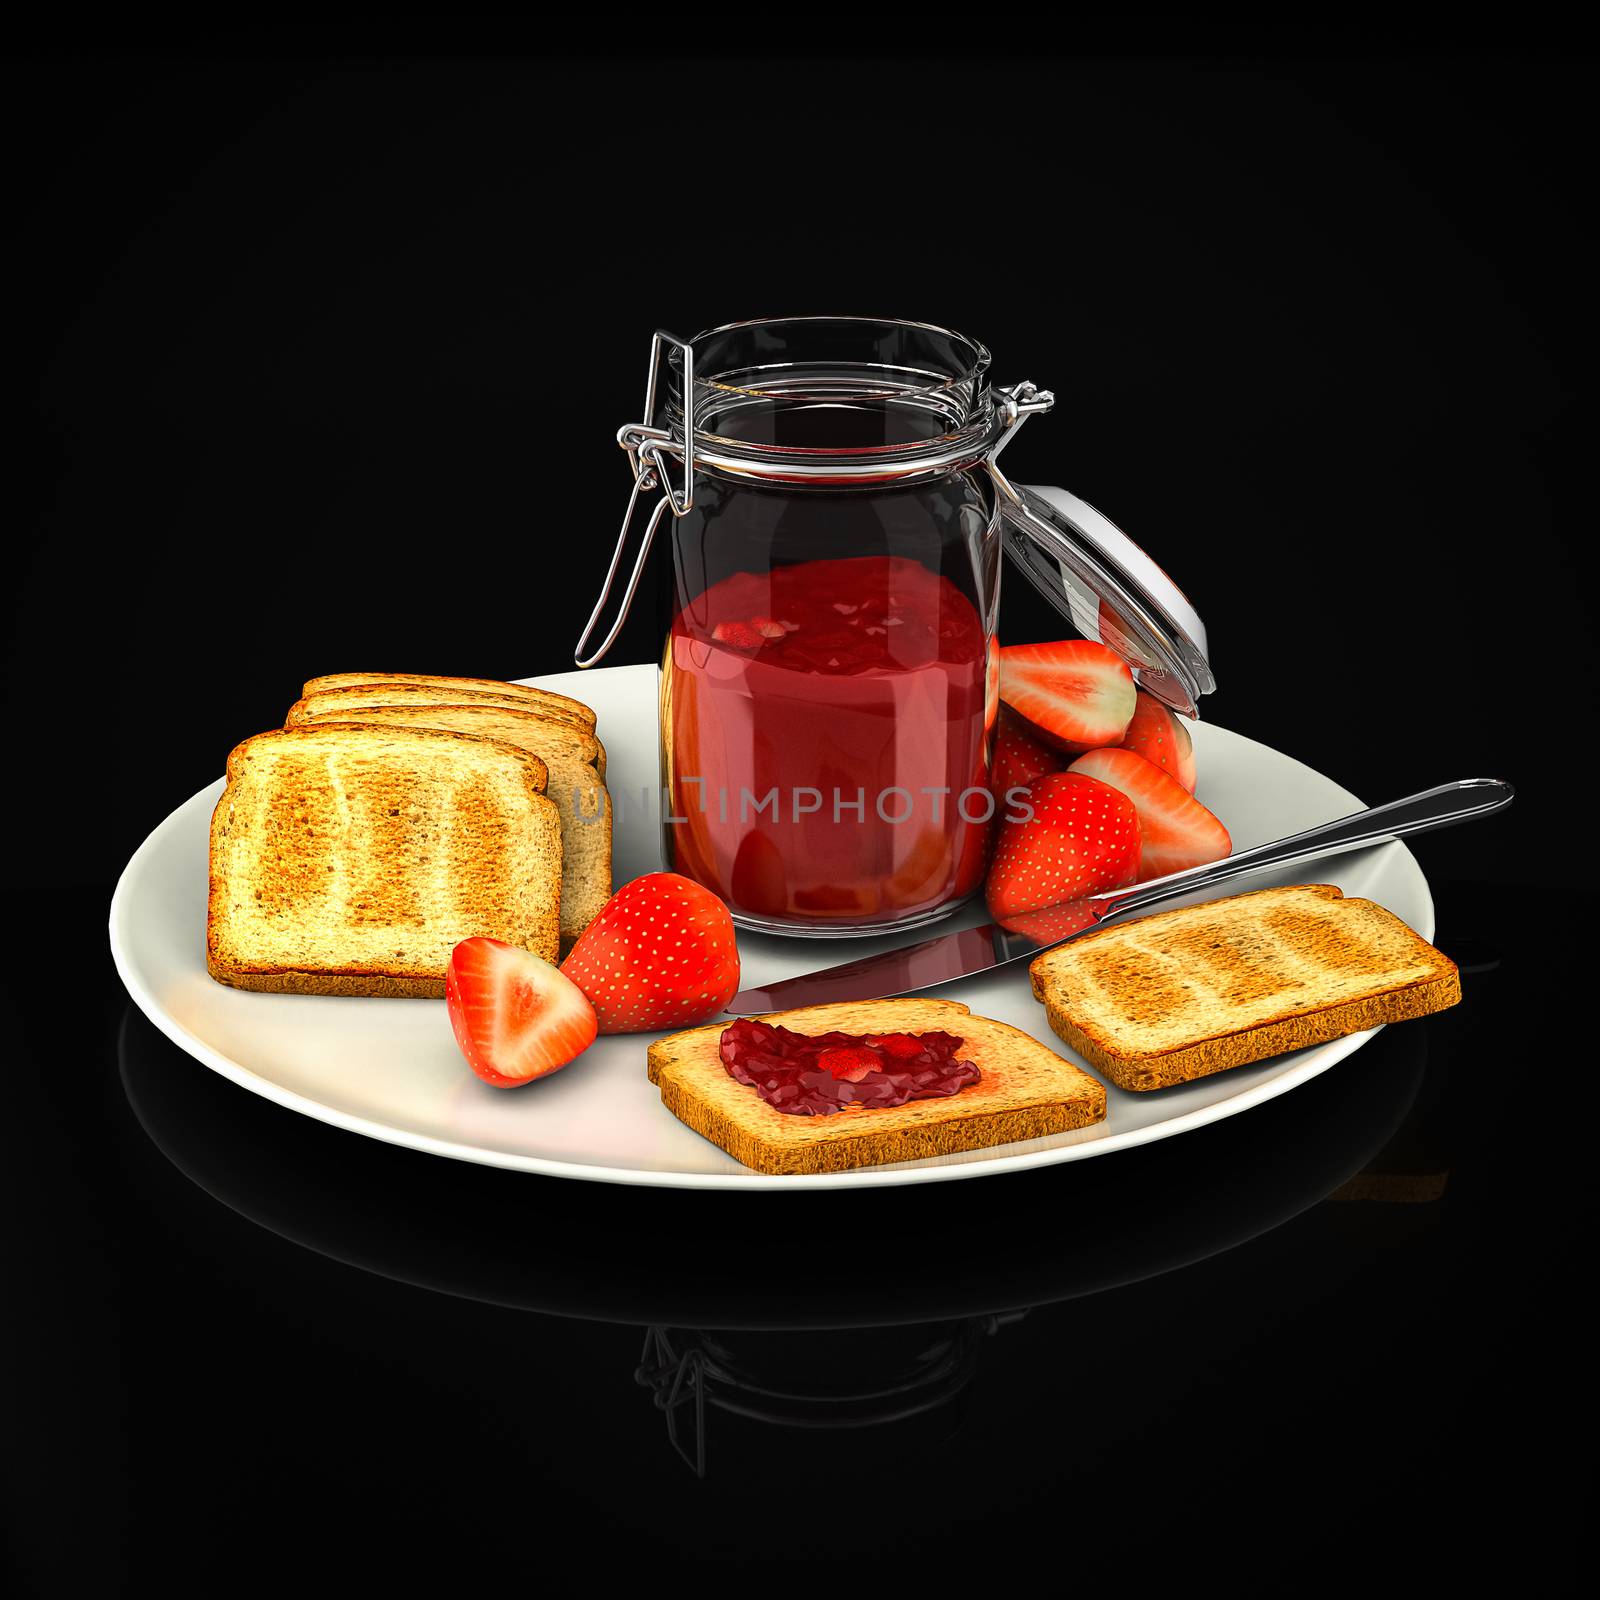 Toast with strawberry jam on a black background